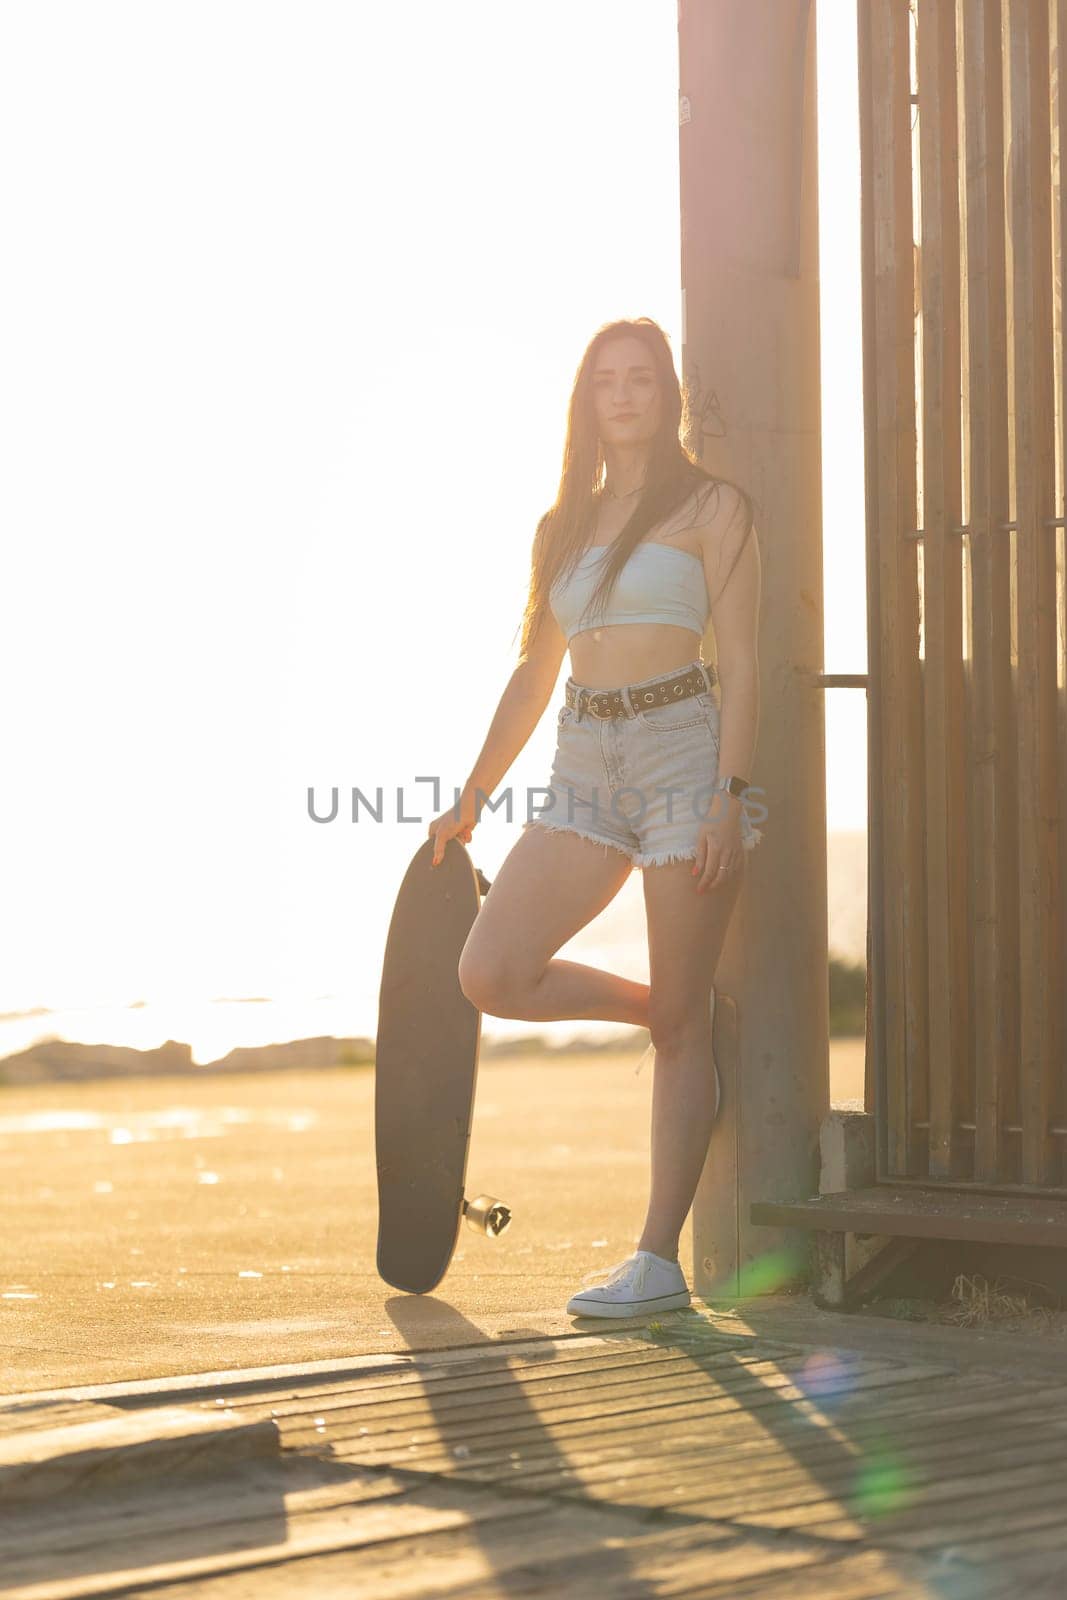 A woman is standing on a beach holding a skateboard. She is wearing shorts and a tank top